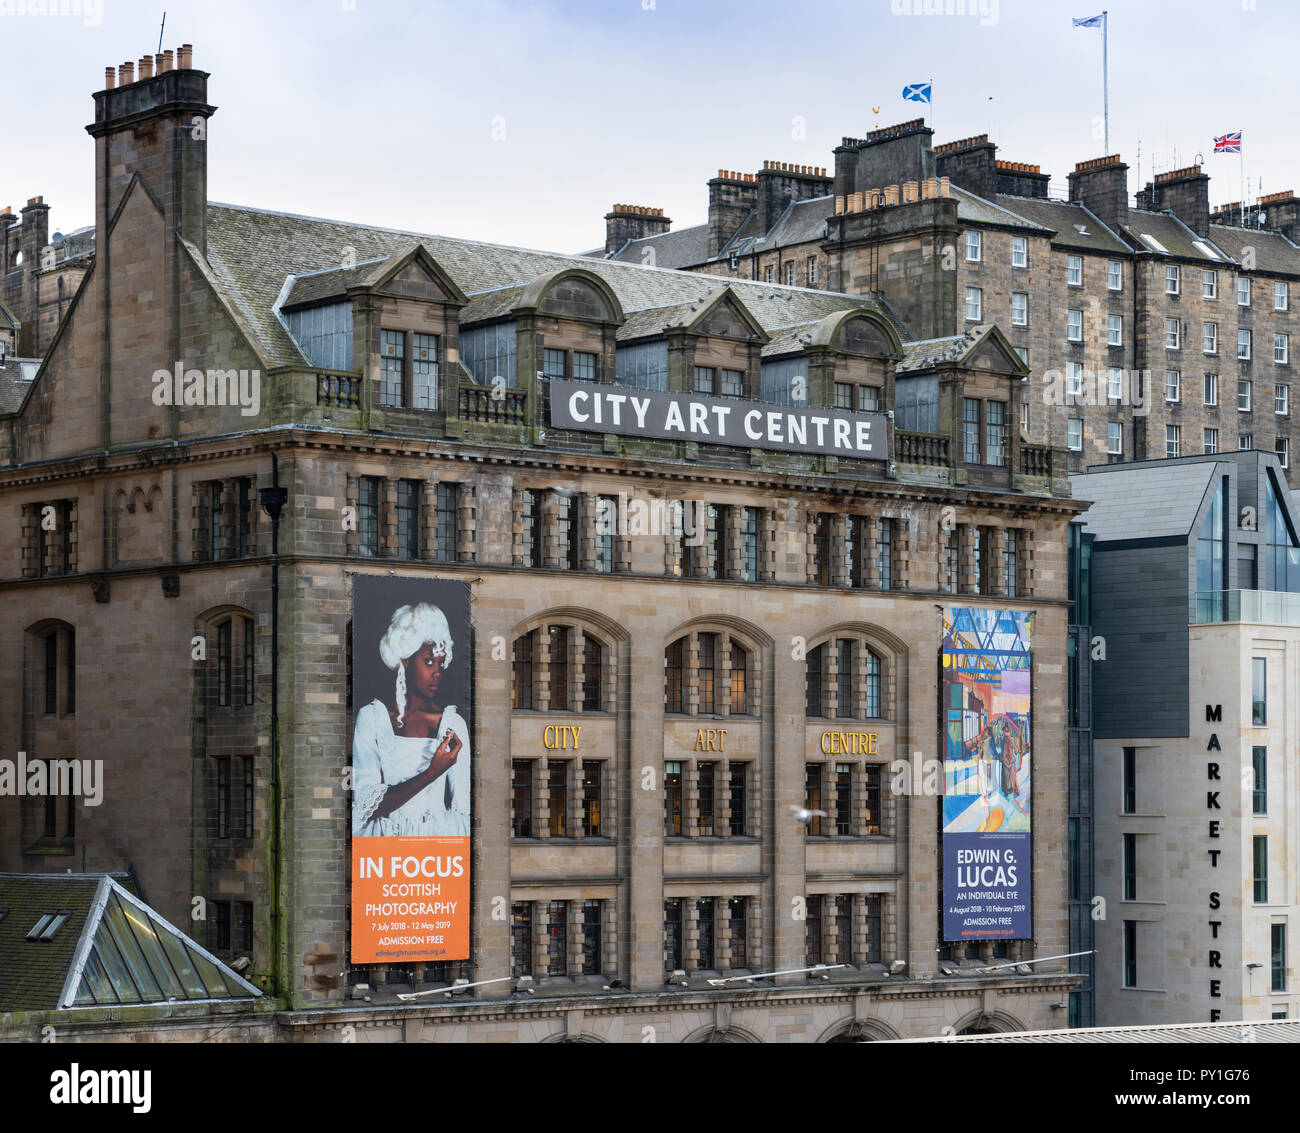 View of exterior of the City Art Centre in Edinburgh Old Town, Scotland, UK Stock Photo